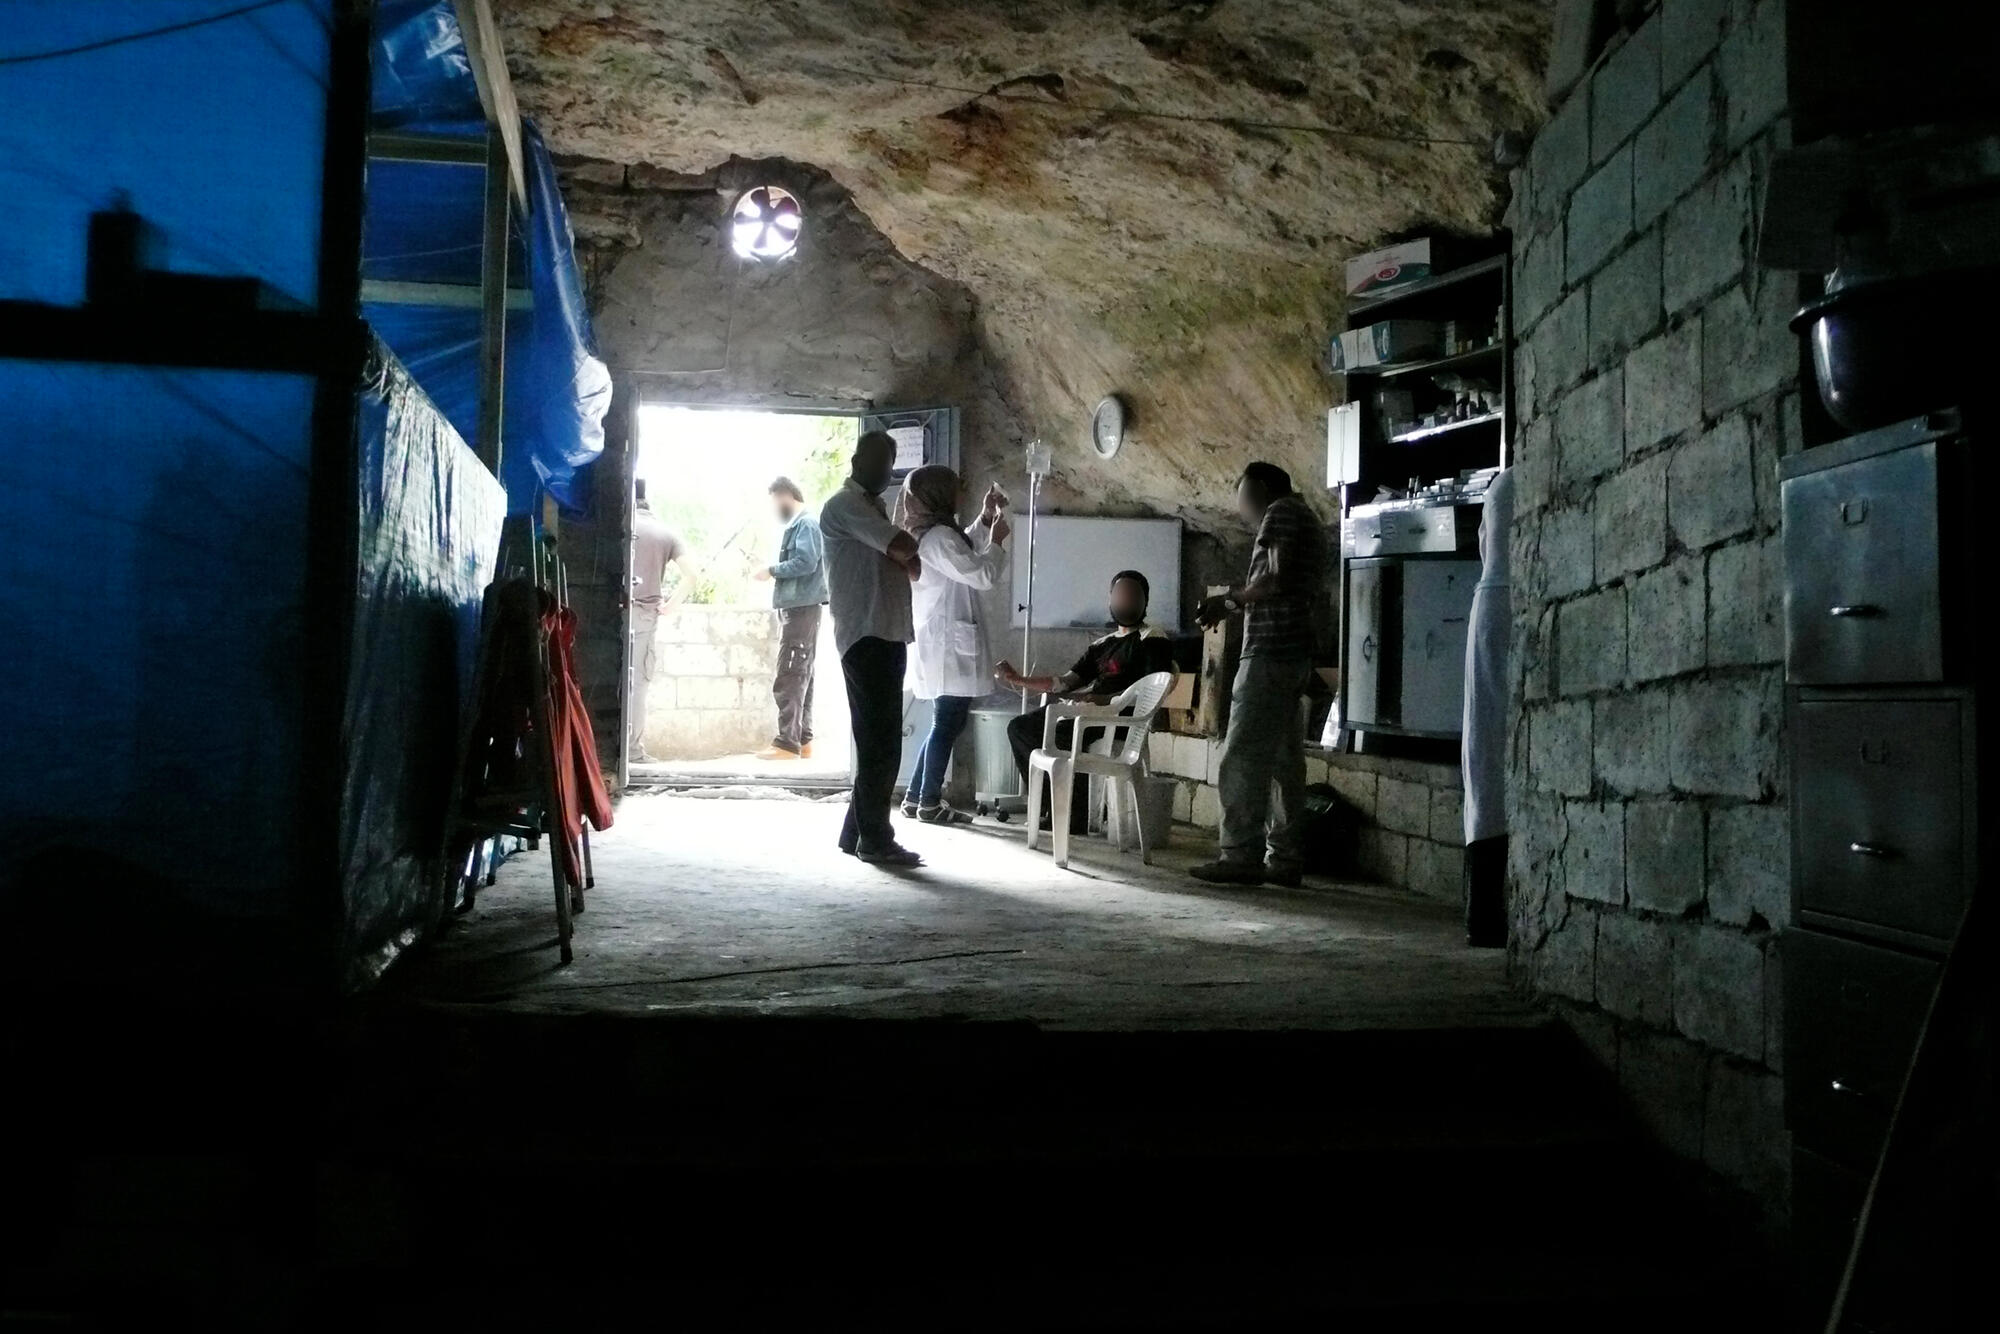 Cave transforms into hospital, August 2012.Close to Syria’s border with Turkey, MSF sets up a hospital inside a cave previously used for storing fruit, vegetables and fuel. Despite major logistical and medical challenges, the MSF team creates a sterile surgical unit suitable for providing emergency care and trauma surgery.©MSF